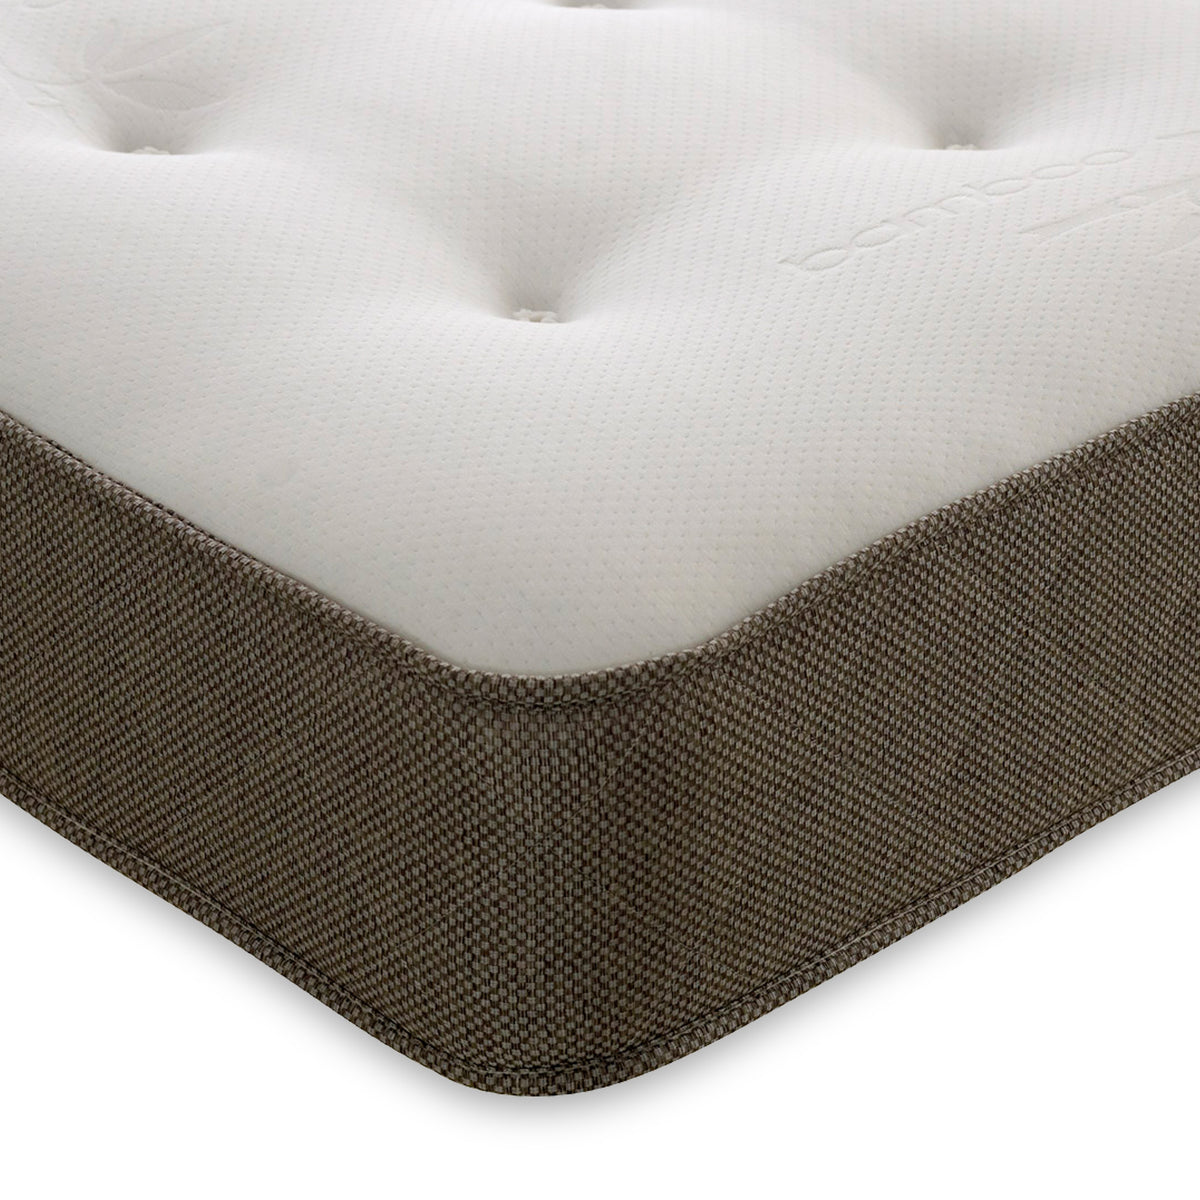 Simply Sprung Ortho Open Coil Mattress from Roseland Sleep